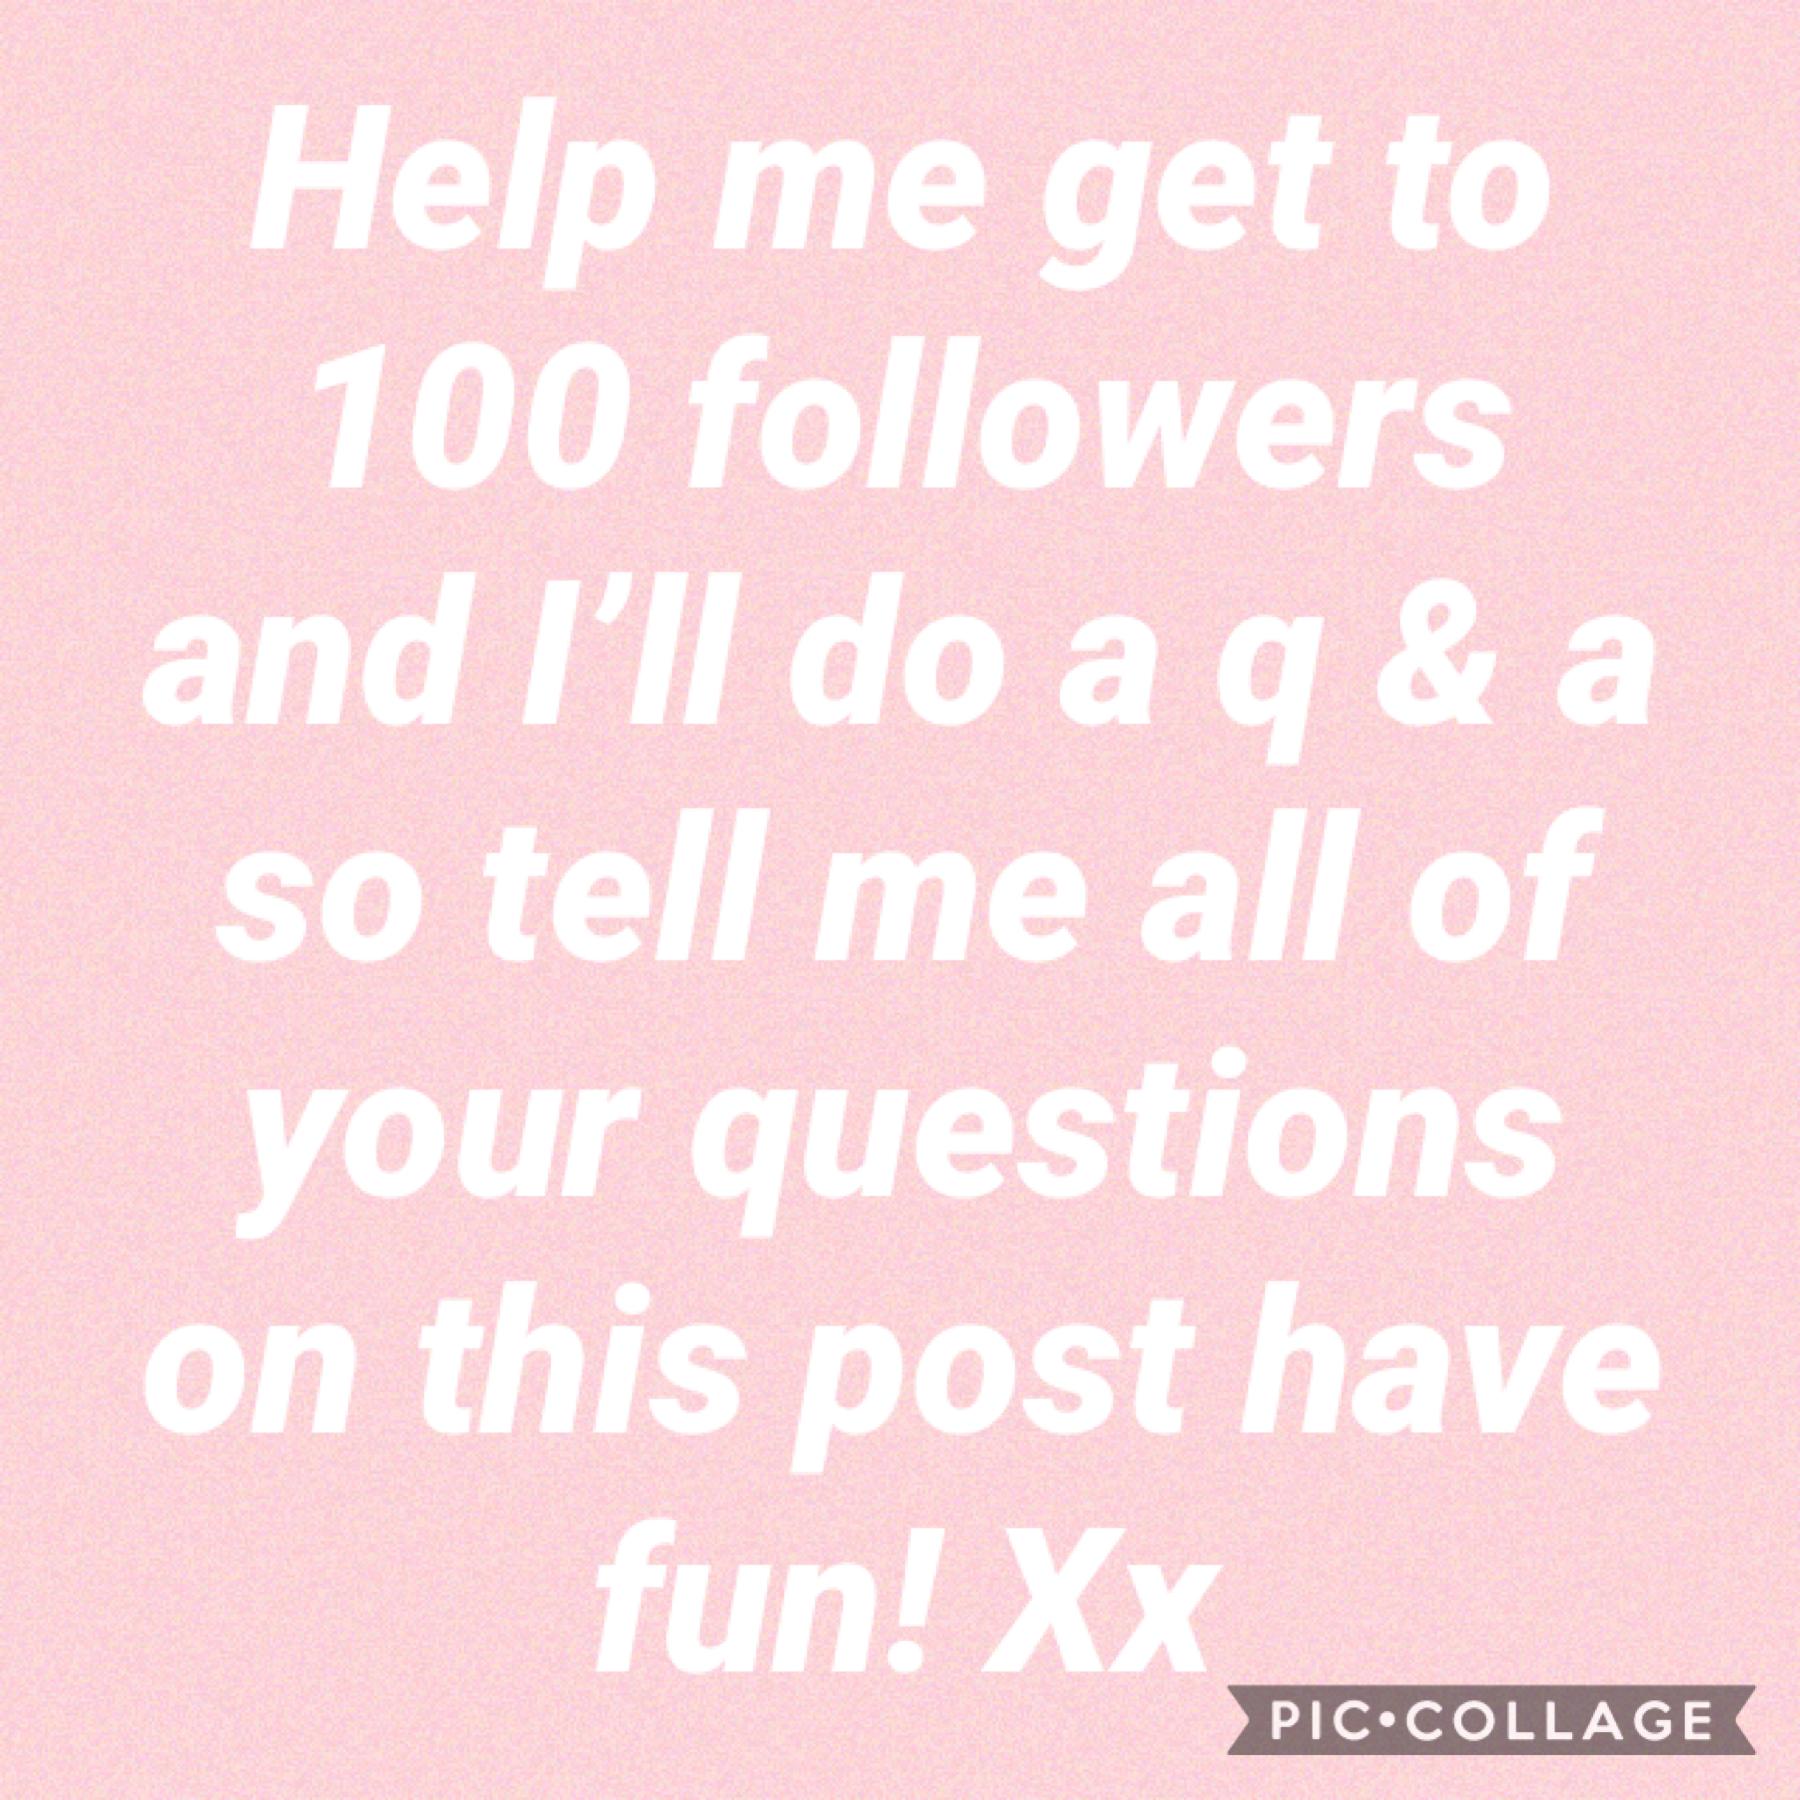 🌟✨🦋Ask me all of your questions I’ll answer them and please get me to 100 followers I’m following everyone back🦋✨🌟 have fun!